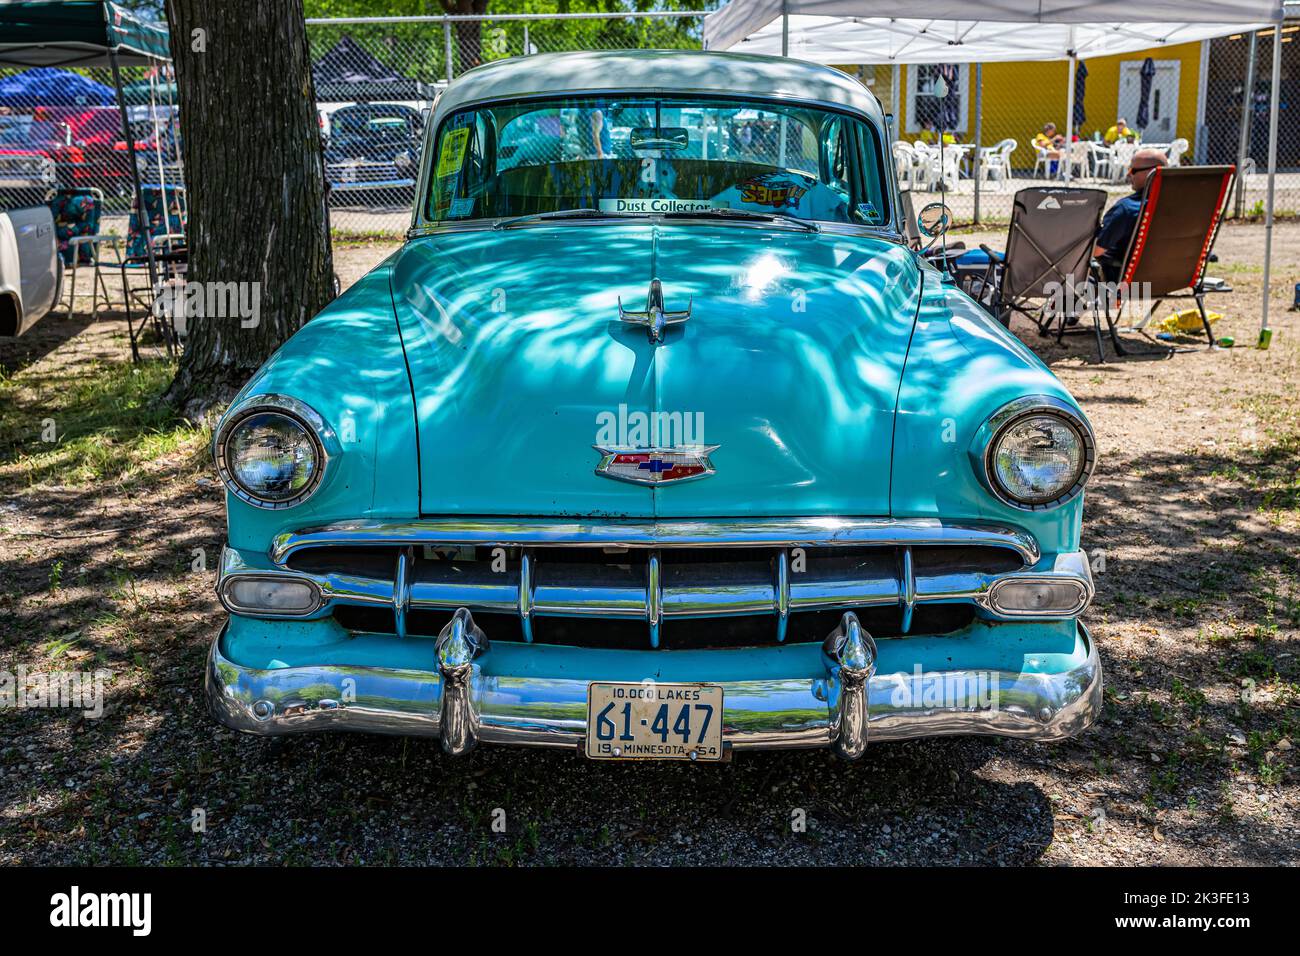 Falcon Heights, MN - June 18, 2022: High perspective front view of a 1954 Chevrolet BelAir 2 Door Sedan at a local car show. Stock Photo